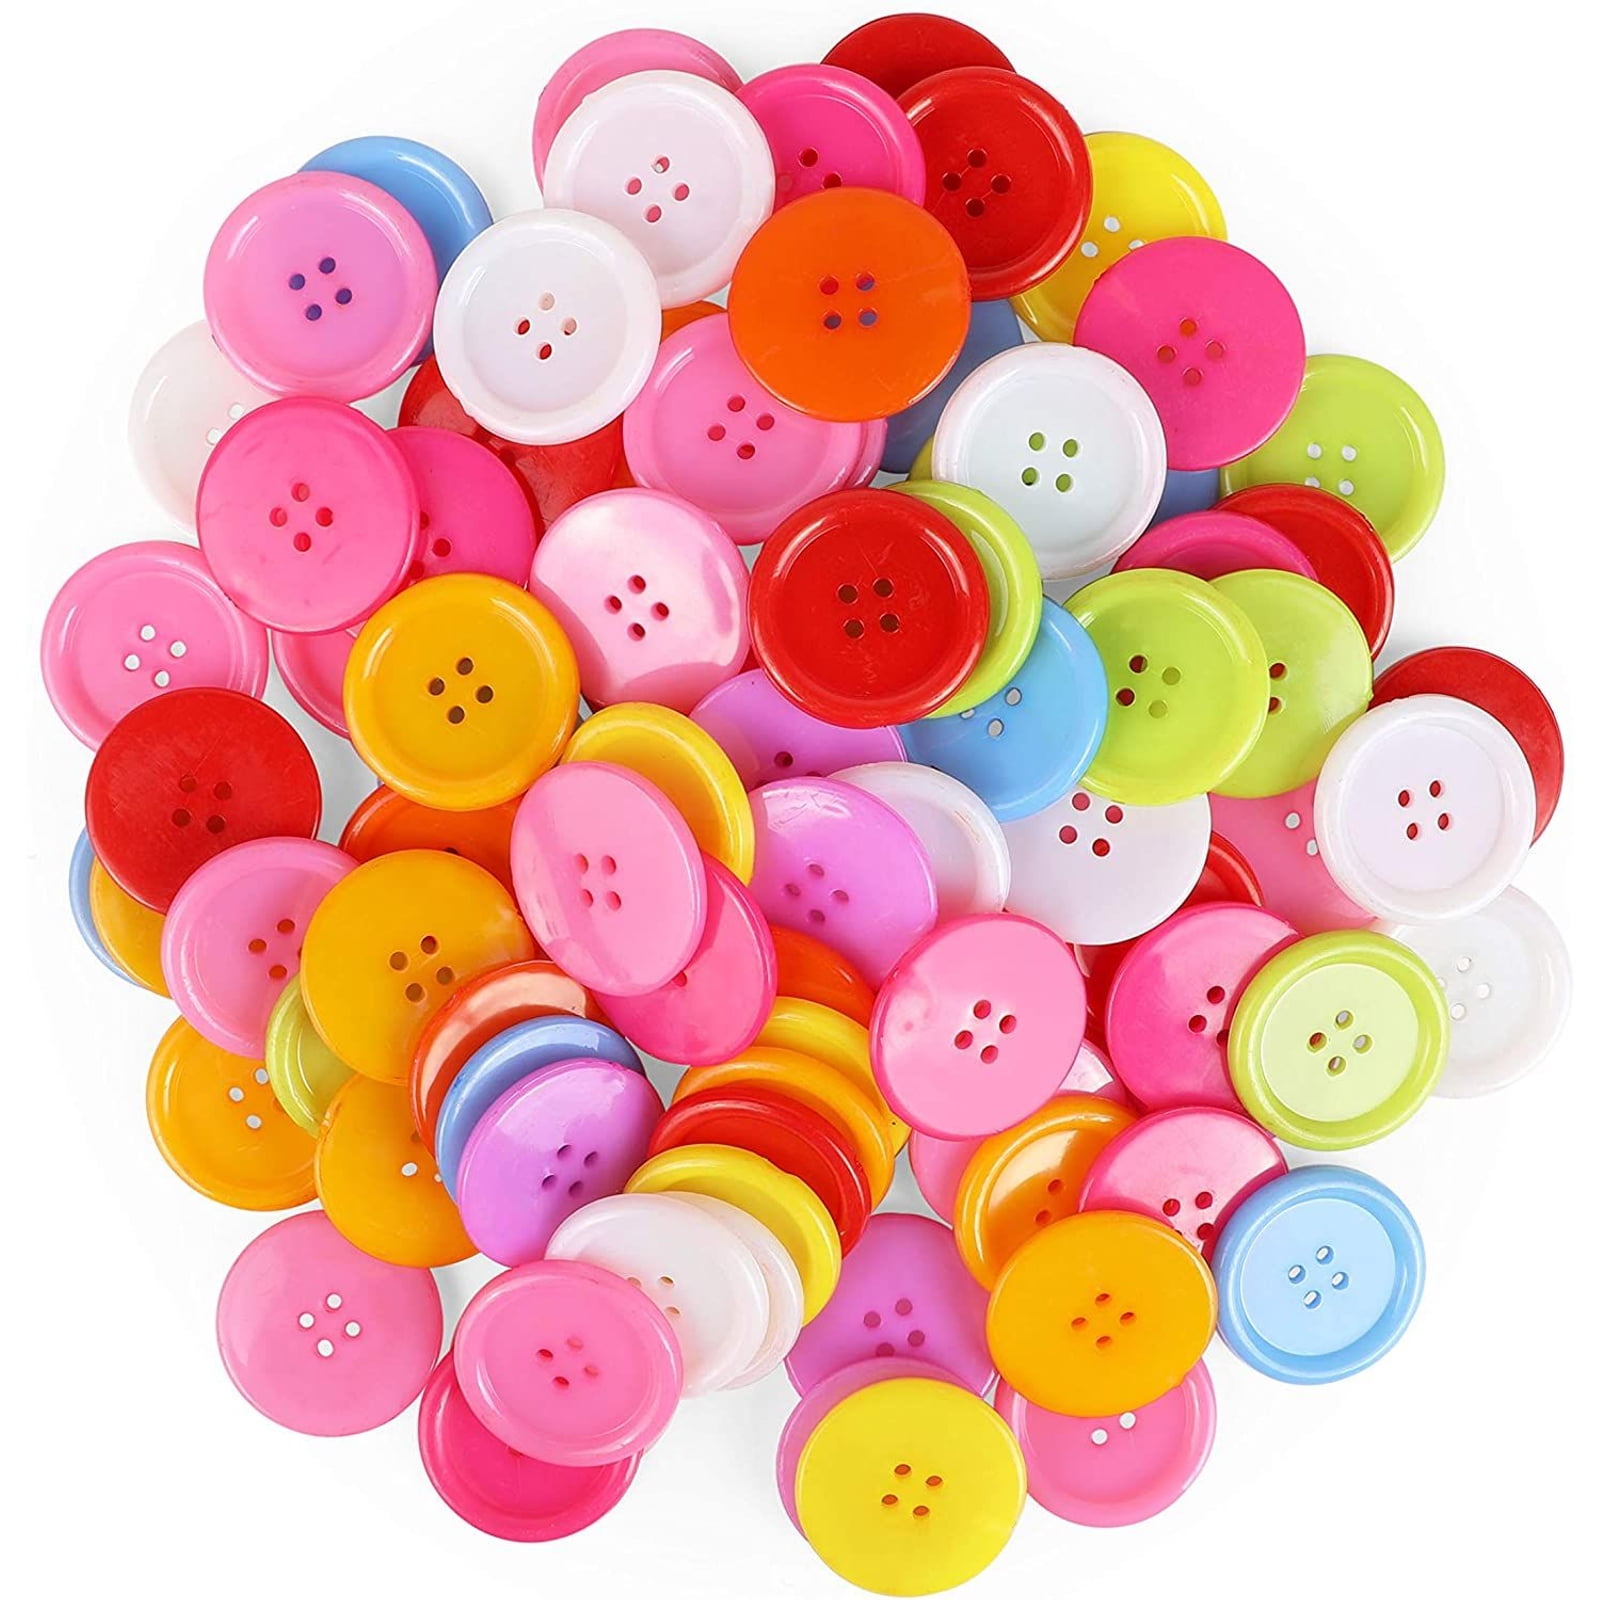 100X Smiley face Round Buttons Mix color sewing scrapbooking Resin buttons 11mm 